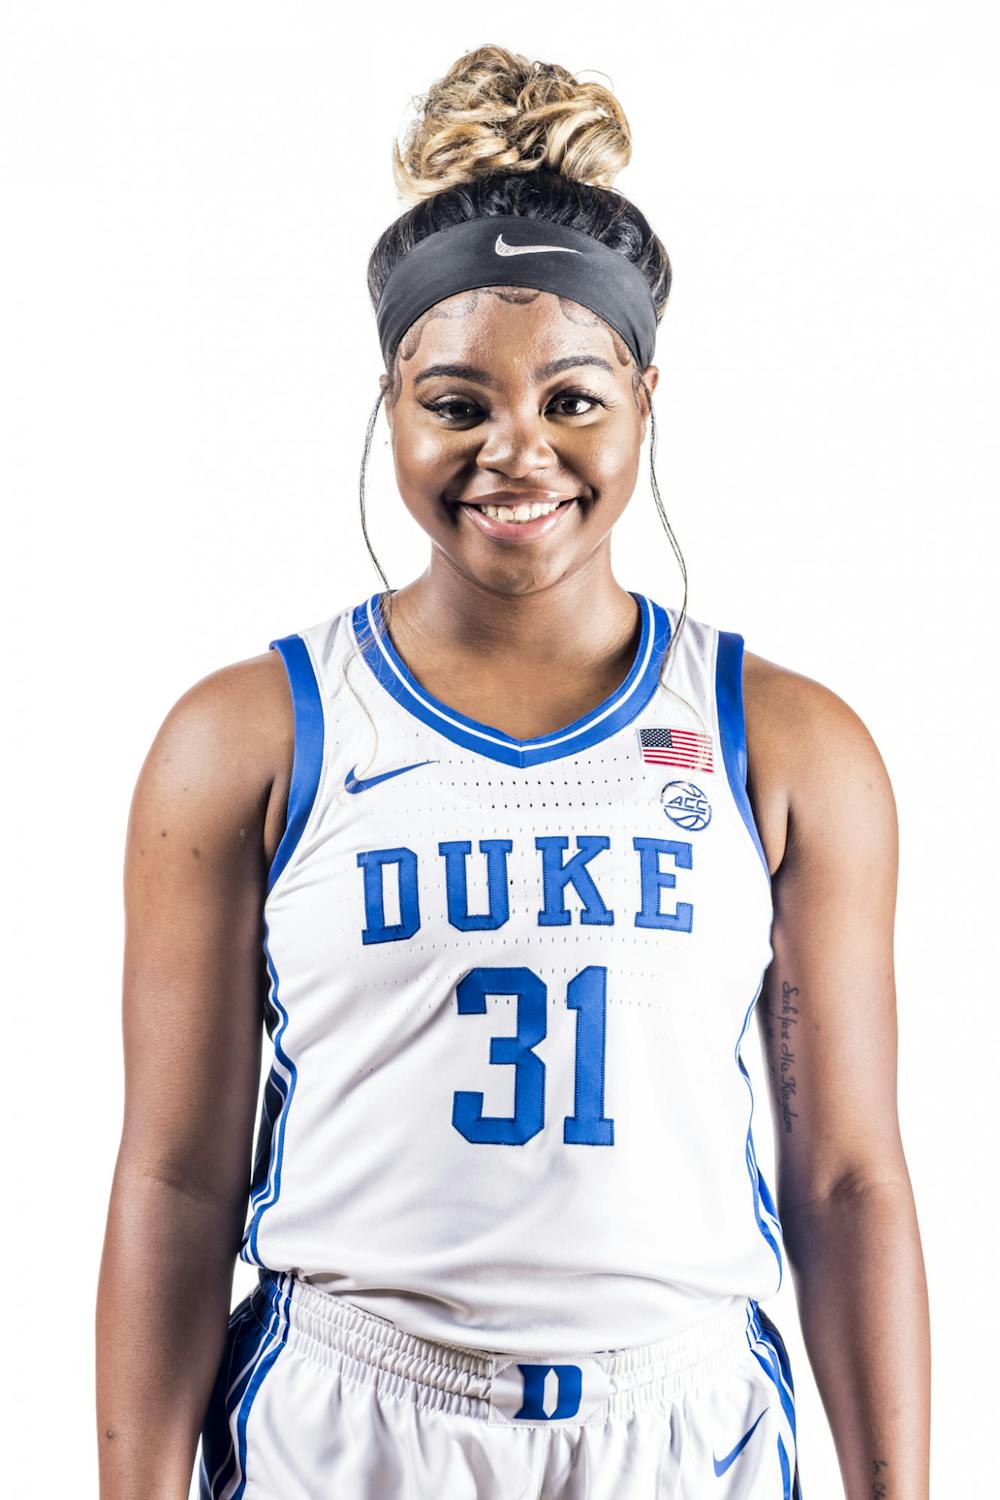 Nyah Green joins the Blue Devils after redshirting the 2019-20 season and a brief sophomore stint at Louisville.